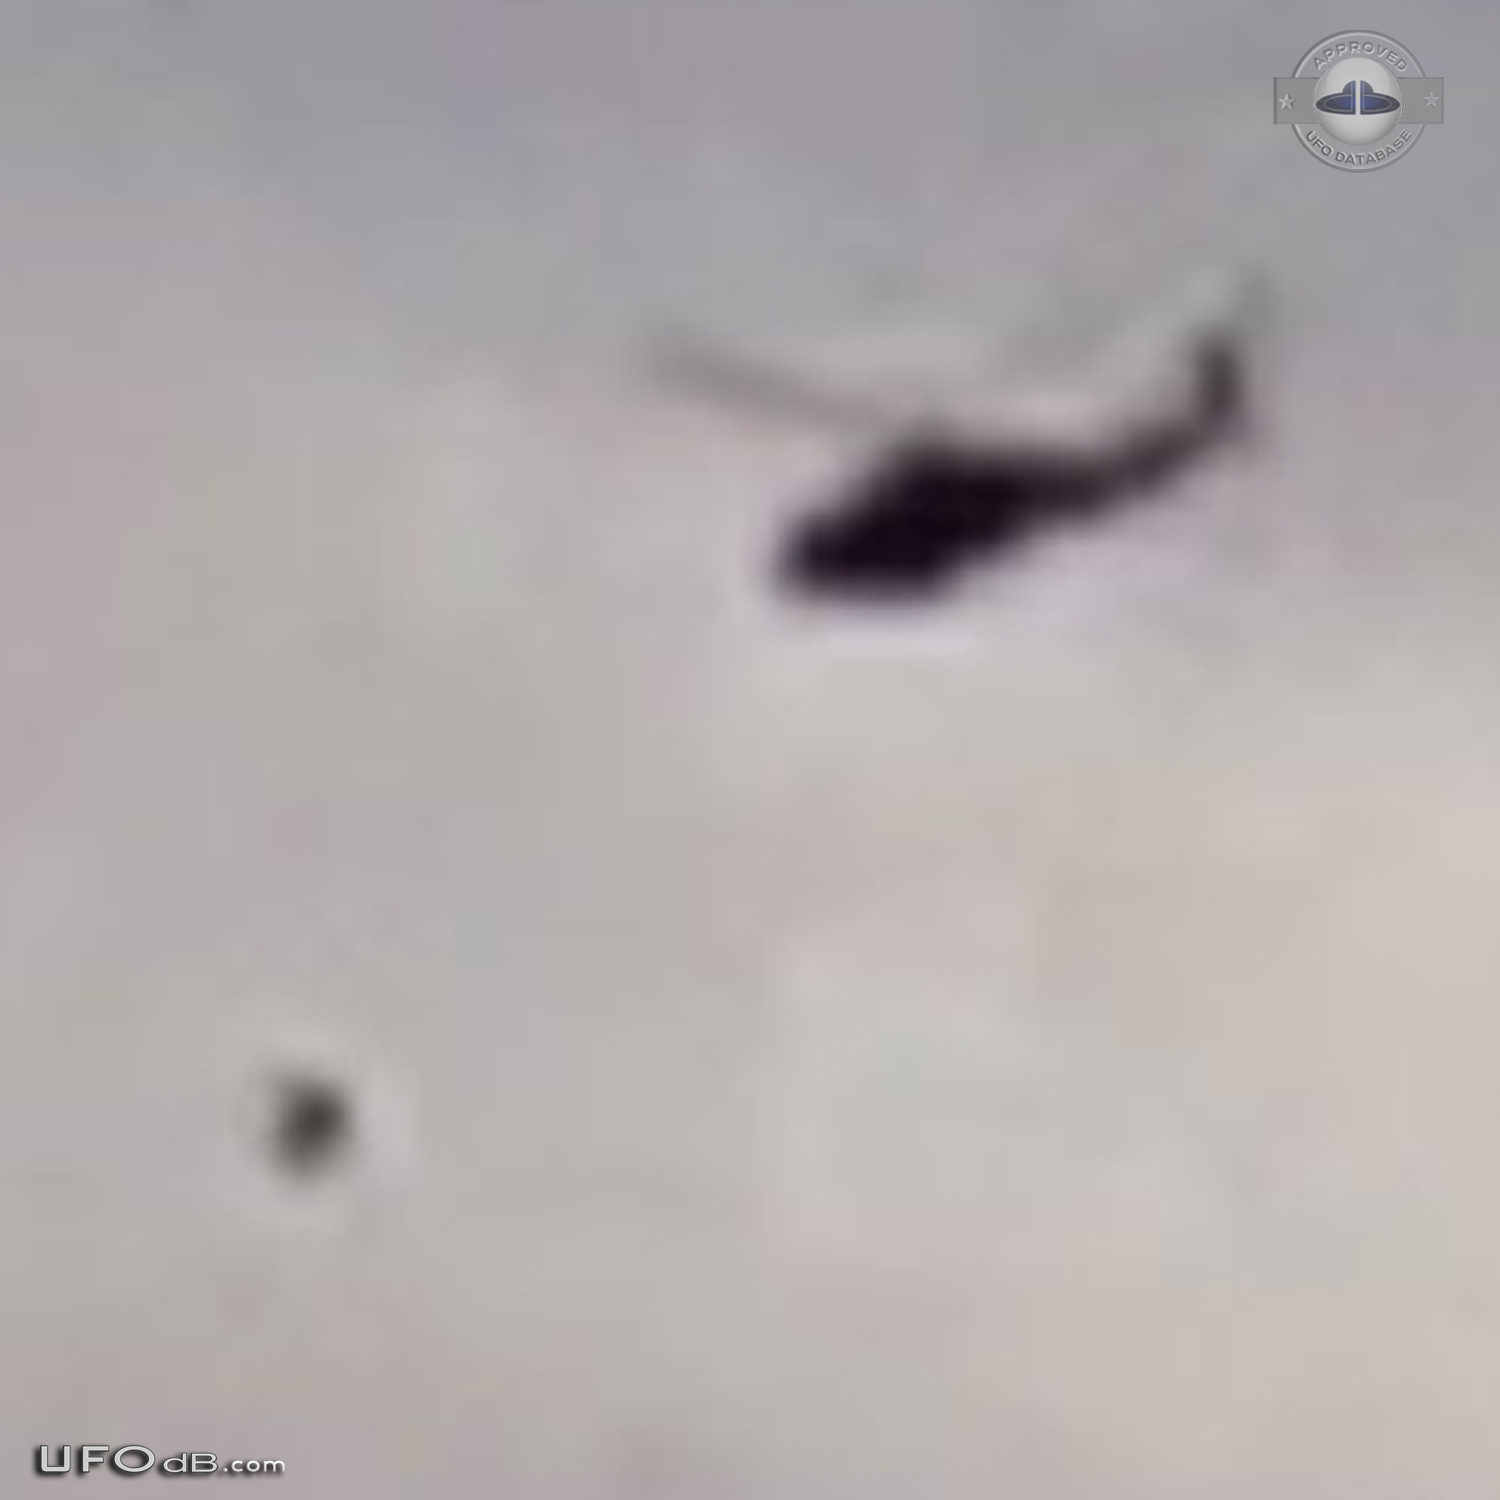 Incredible UFO sighting | 2 helicopters chasing saucer - Illinois 2012 UFO Picture #504-5